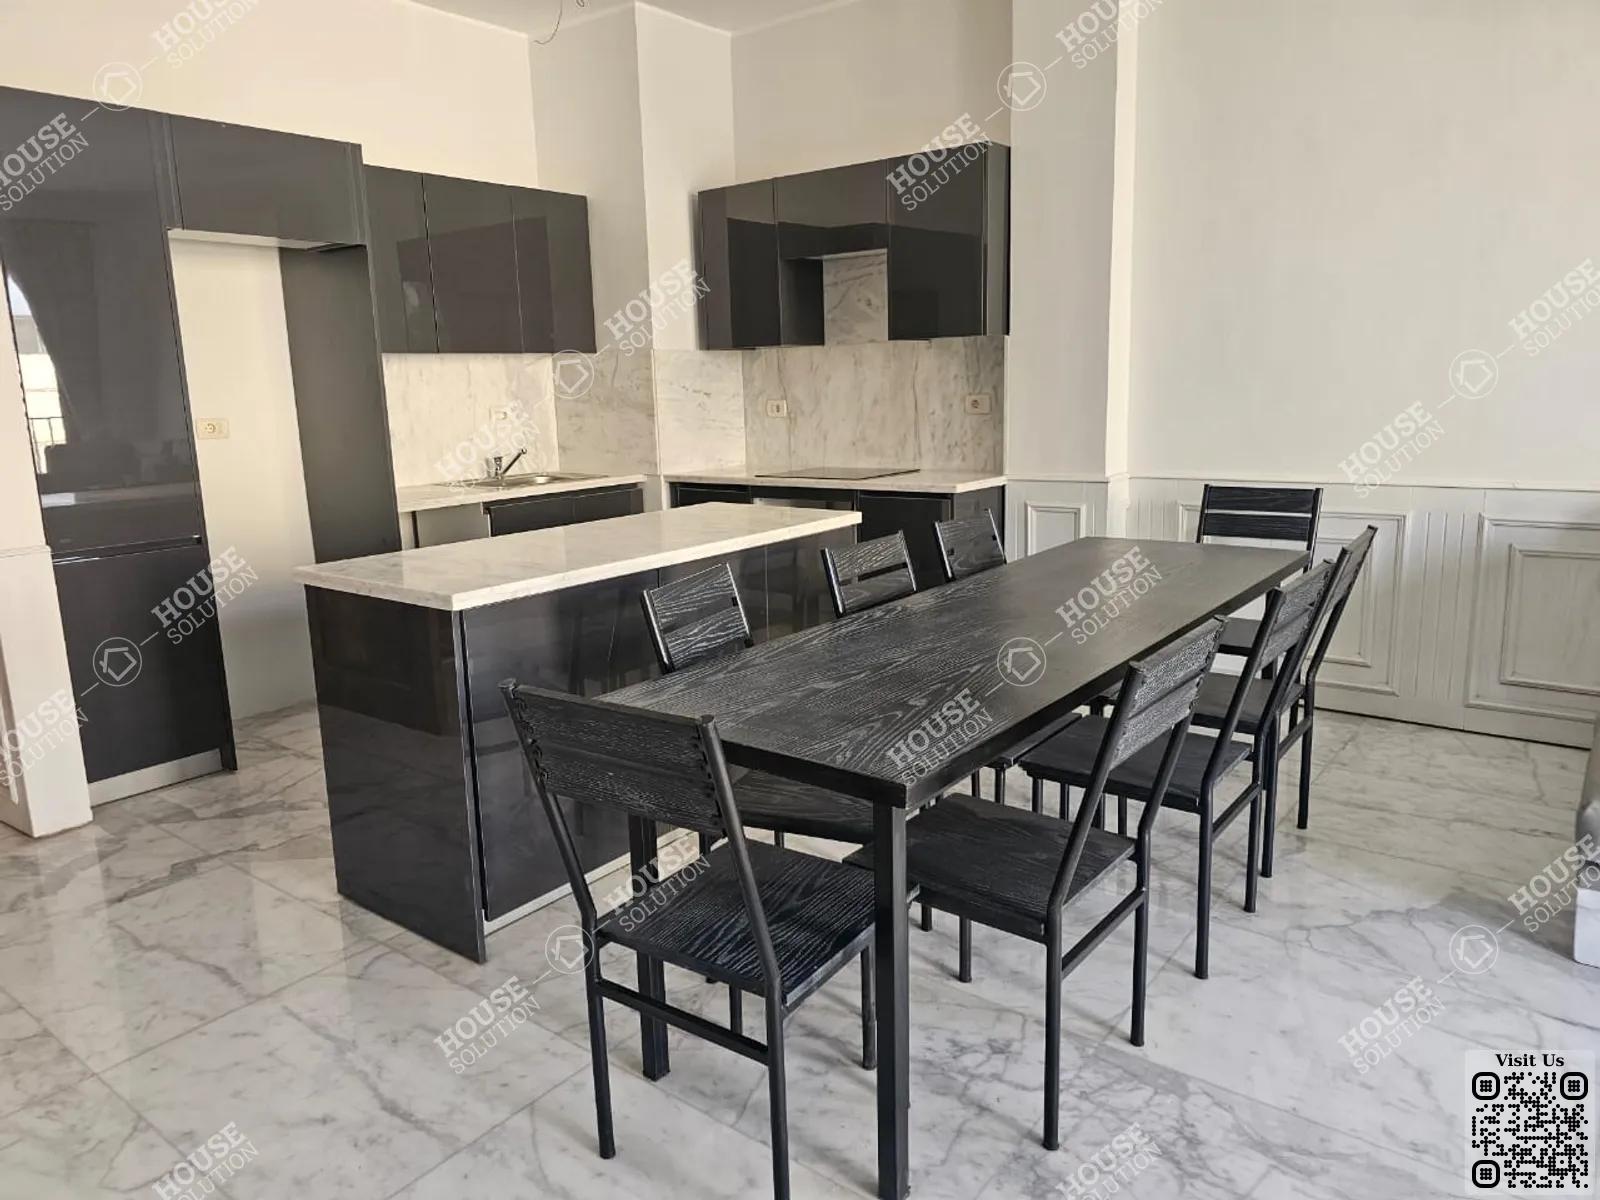 KITCHEN  @ Apartments For Rent In Maadi Maadi Sarayat Area: 165 m² consists of 3 Bedrooms 3 Bathrooms Modern furnished 5 stars #5915-1